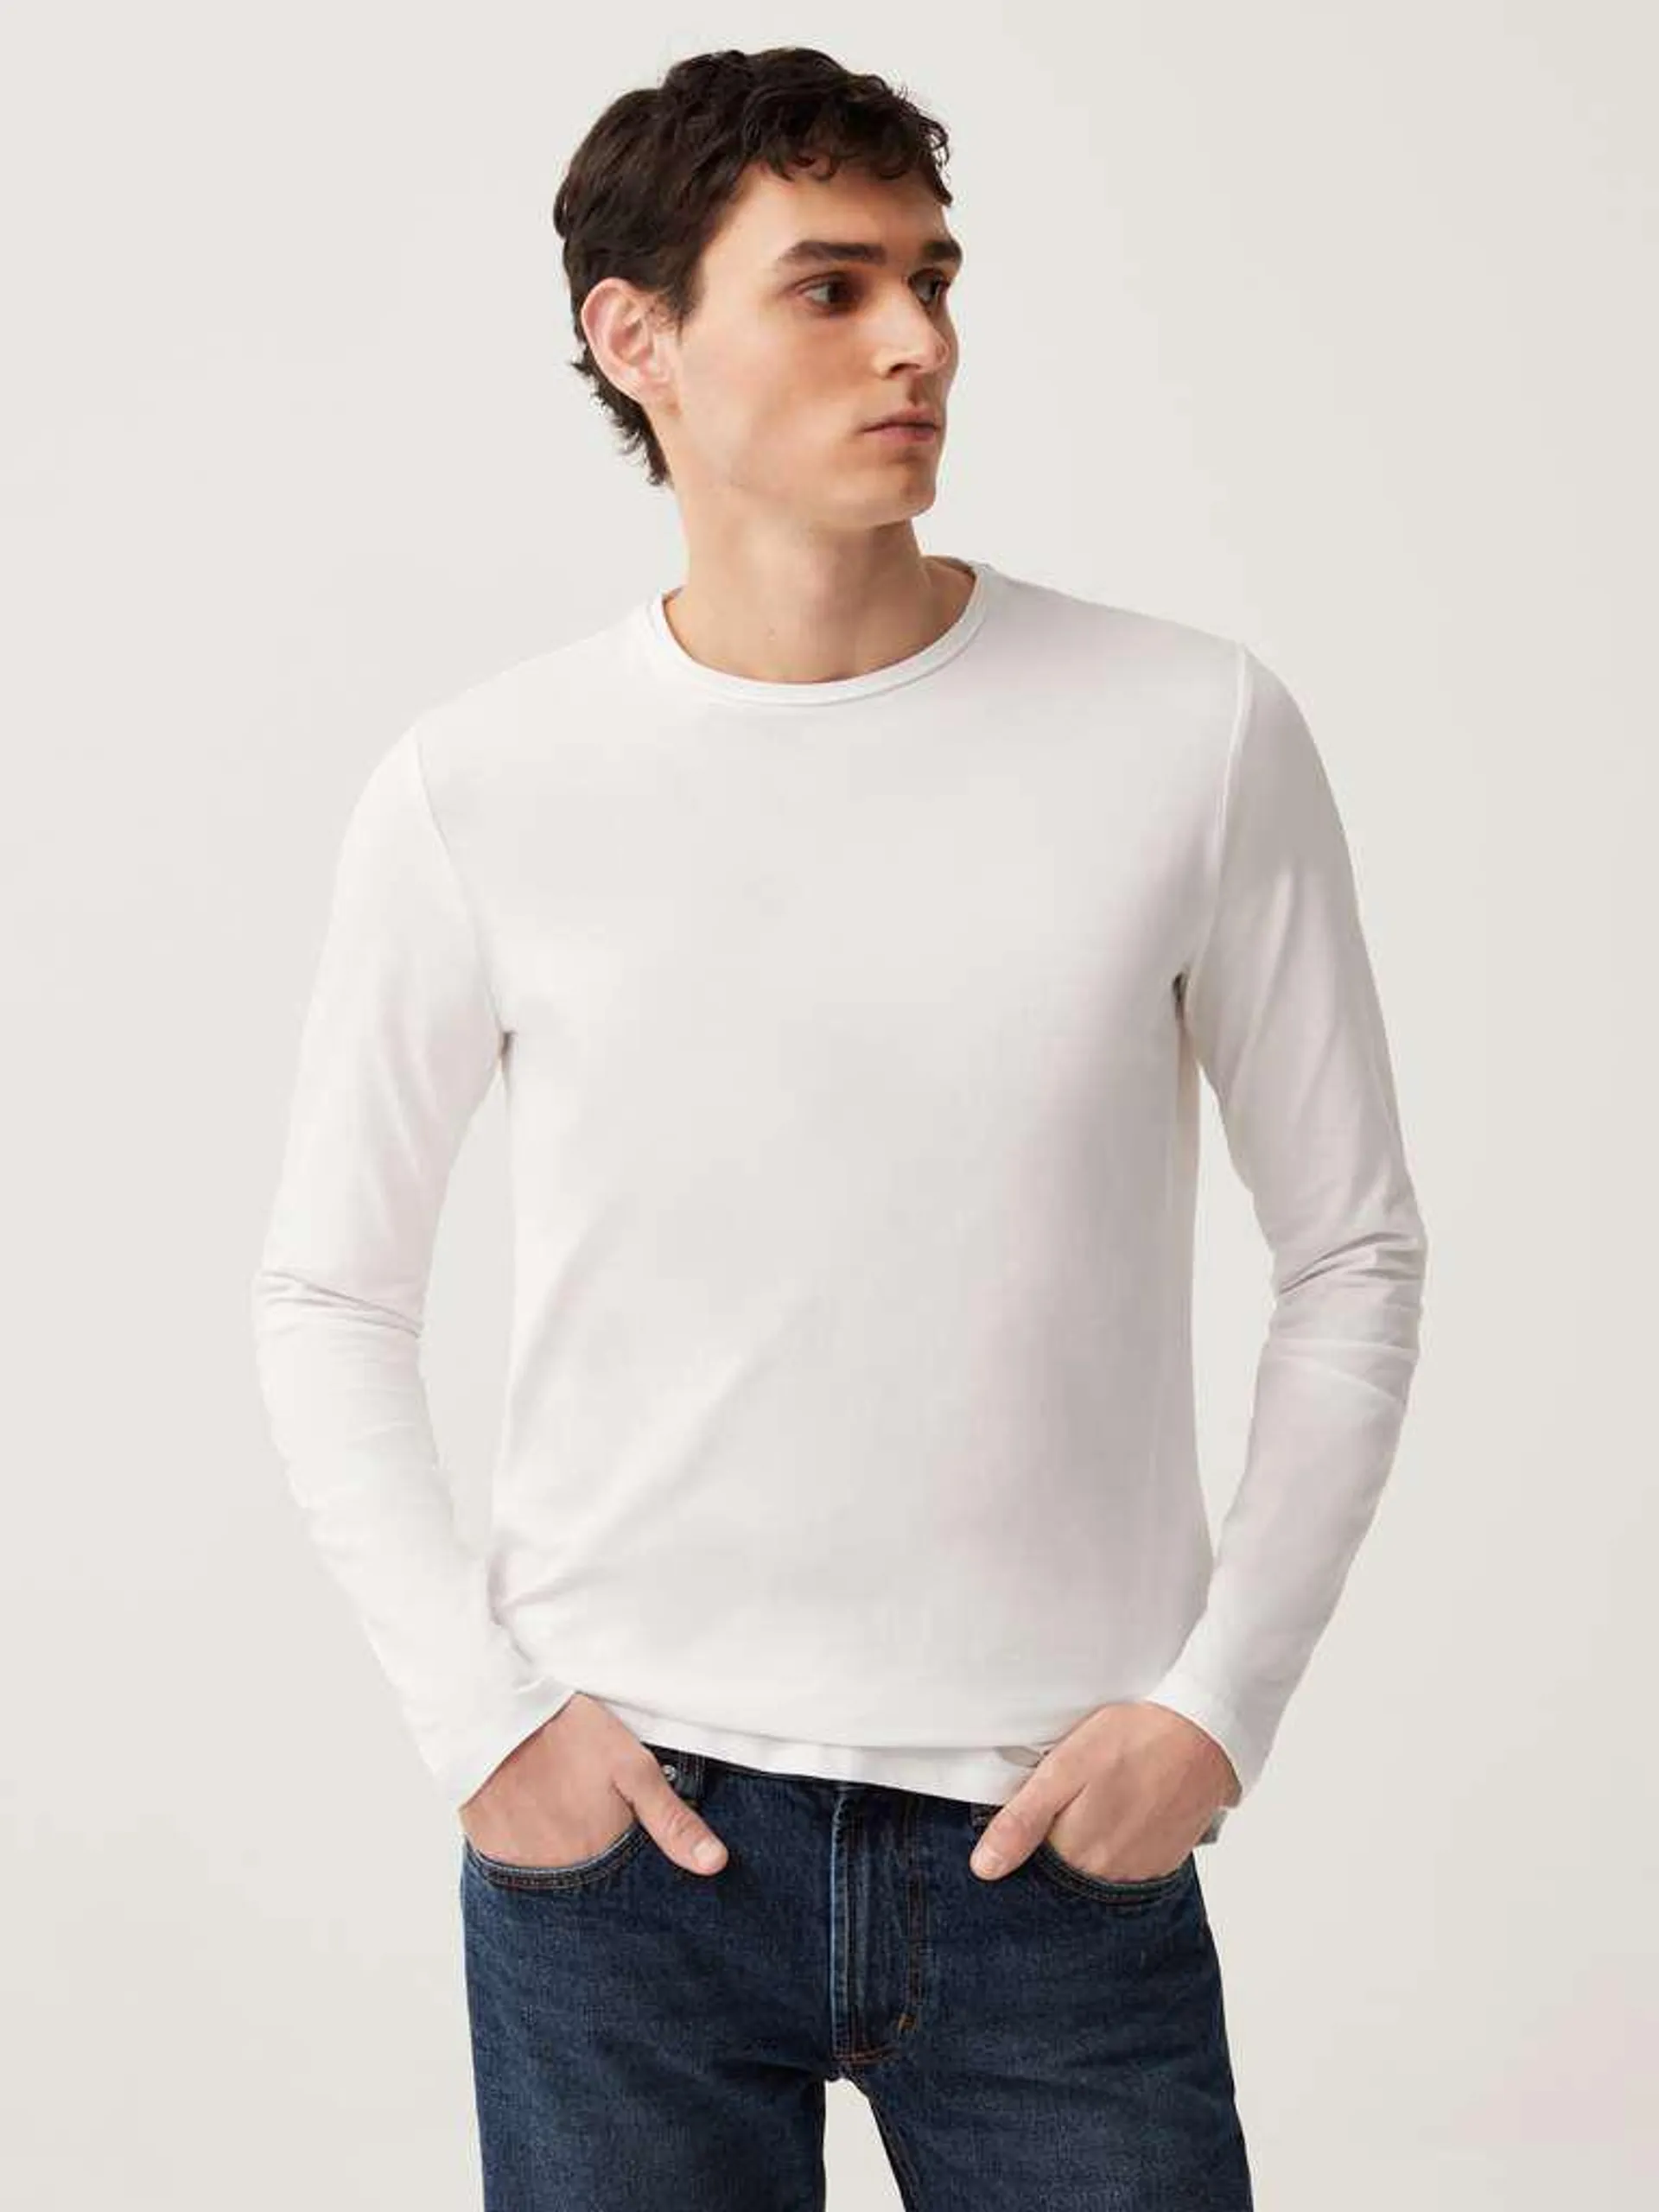 White Long-sleeve T-shirt in jersey